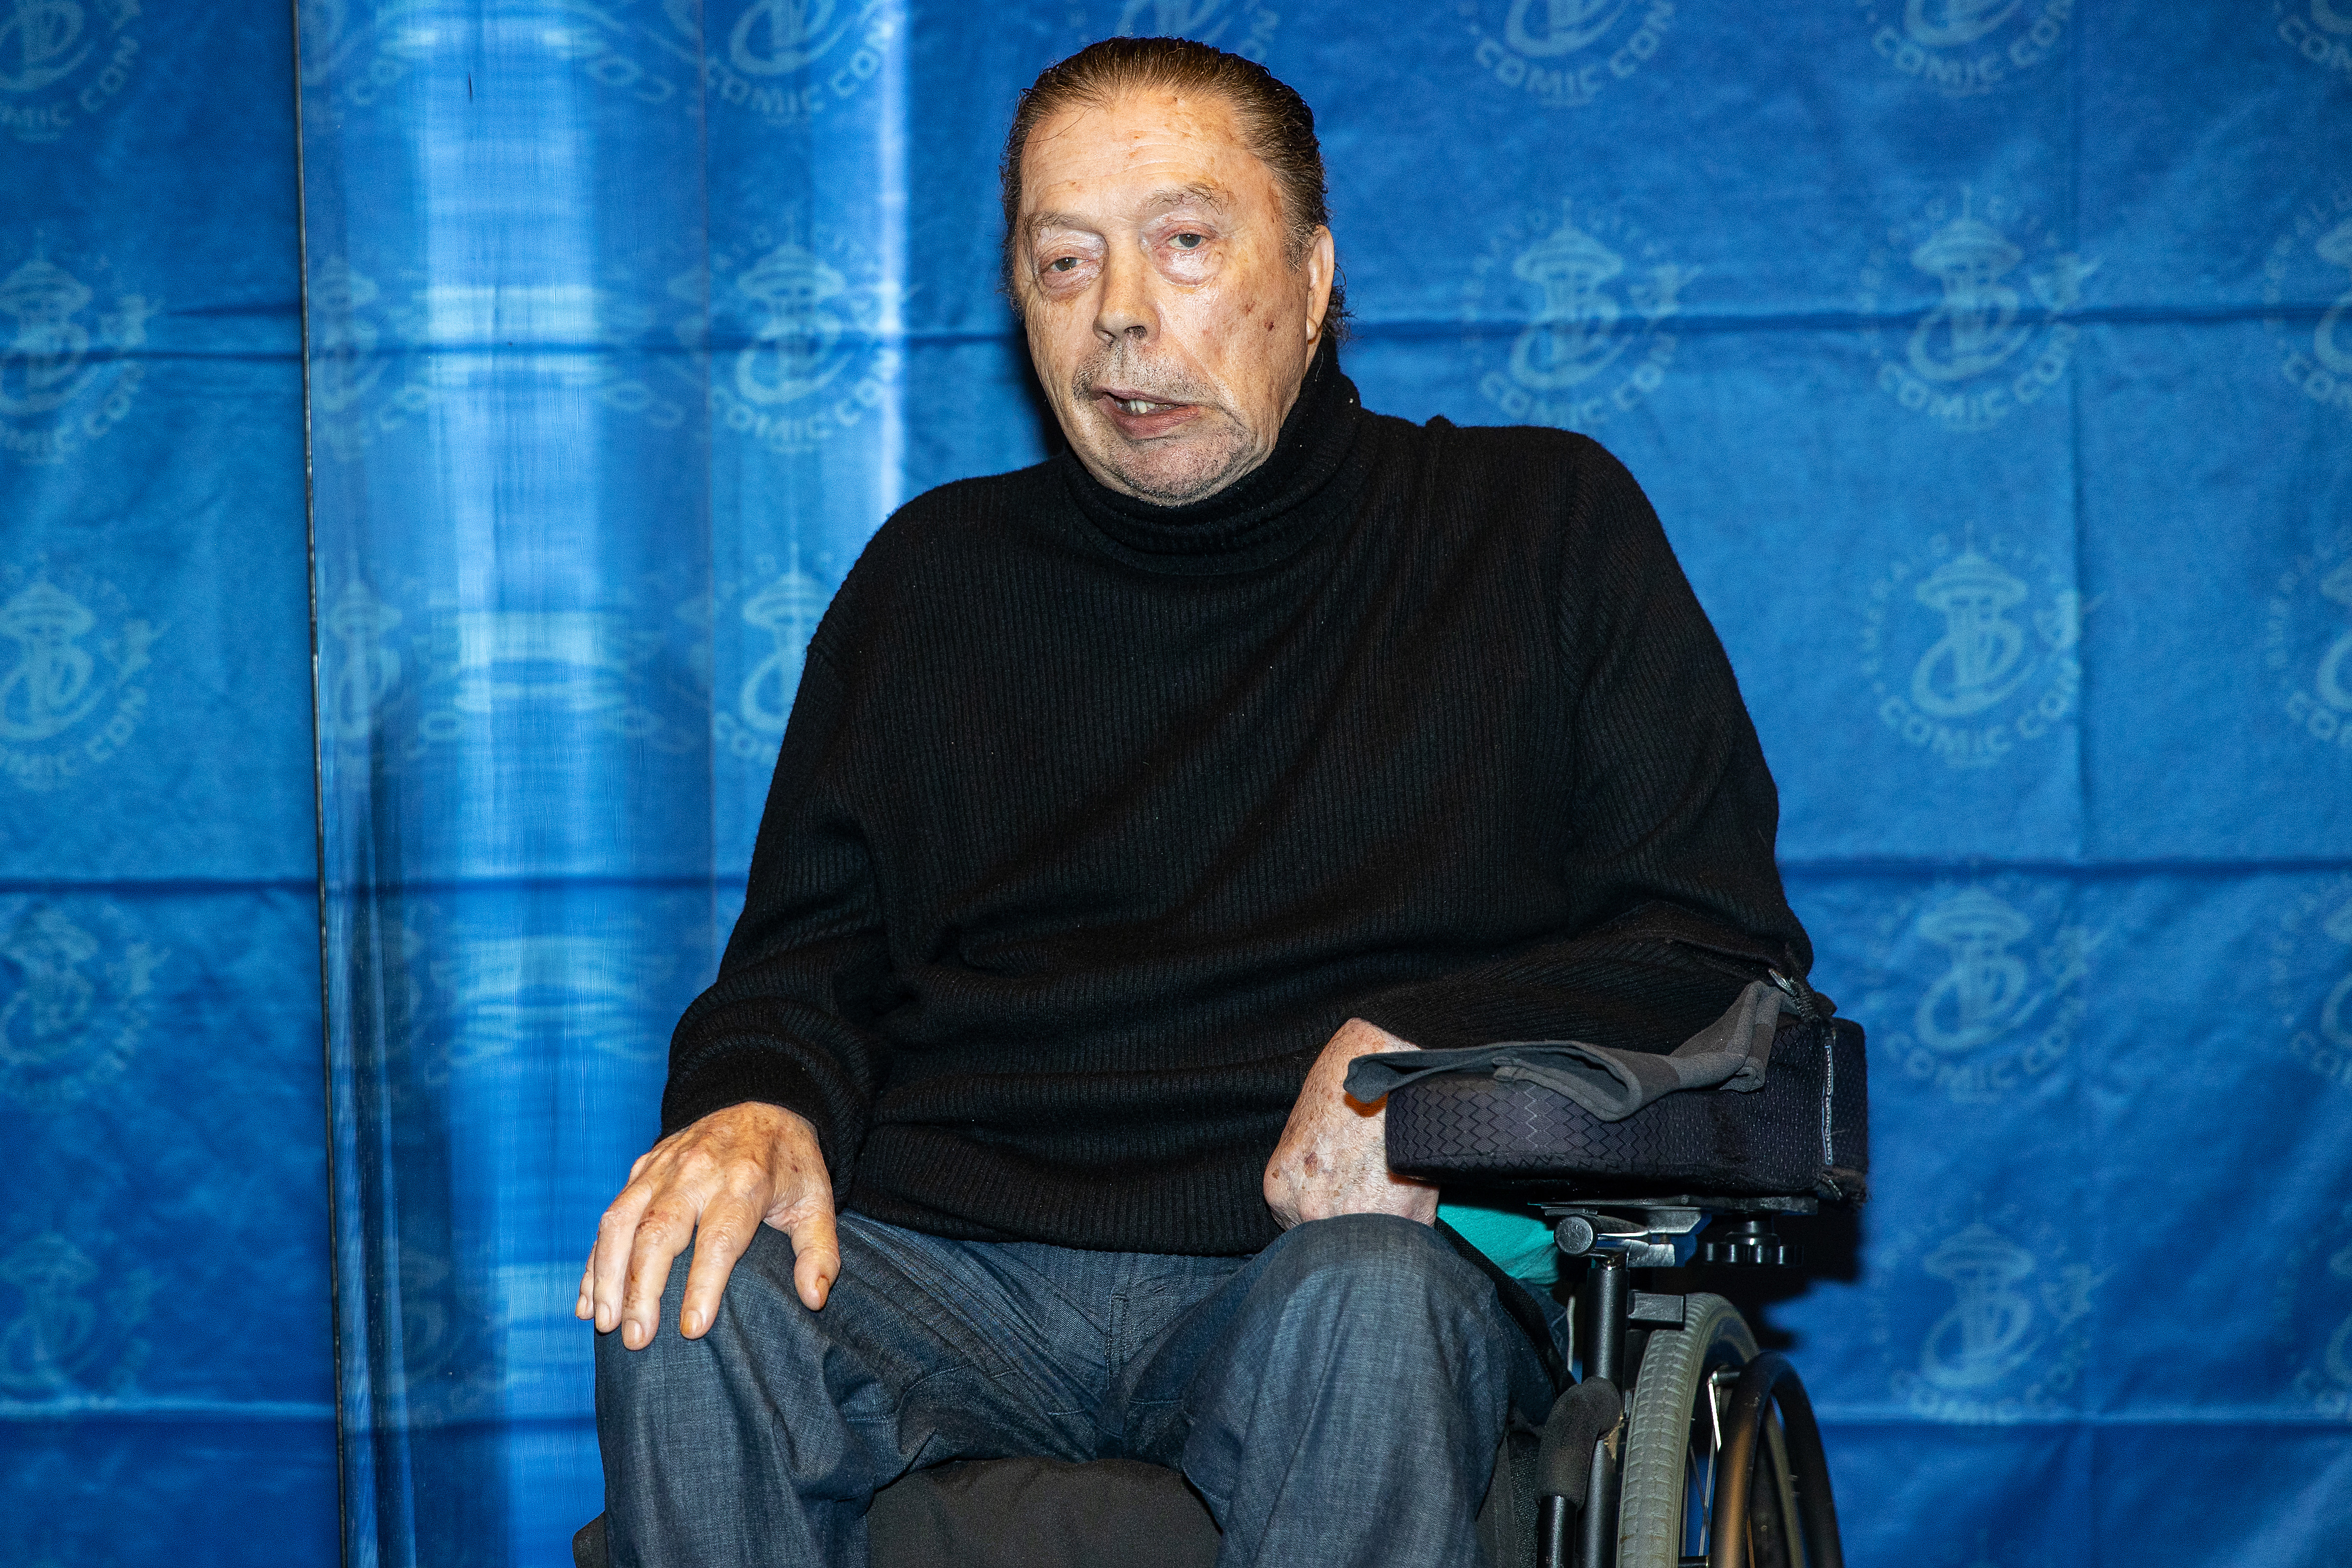 Tim Curry at the Emerald City Comic Con at Washington State Convention Center on December 4, 2021, in Seattle, Washington. | Source: Getty Images